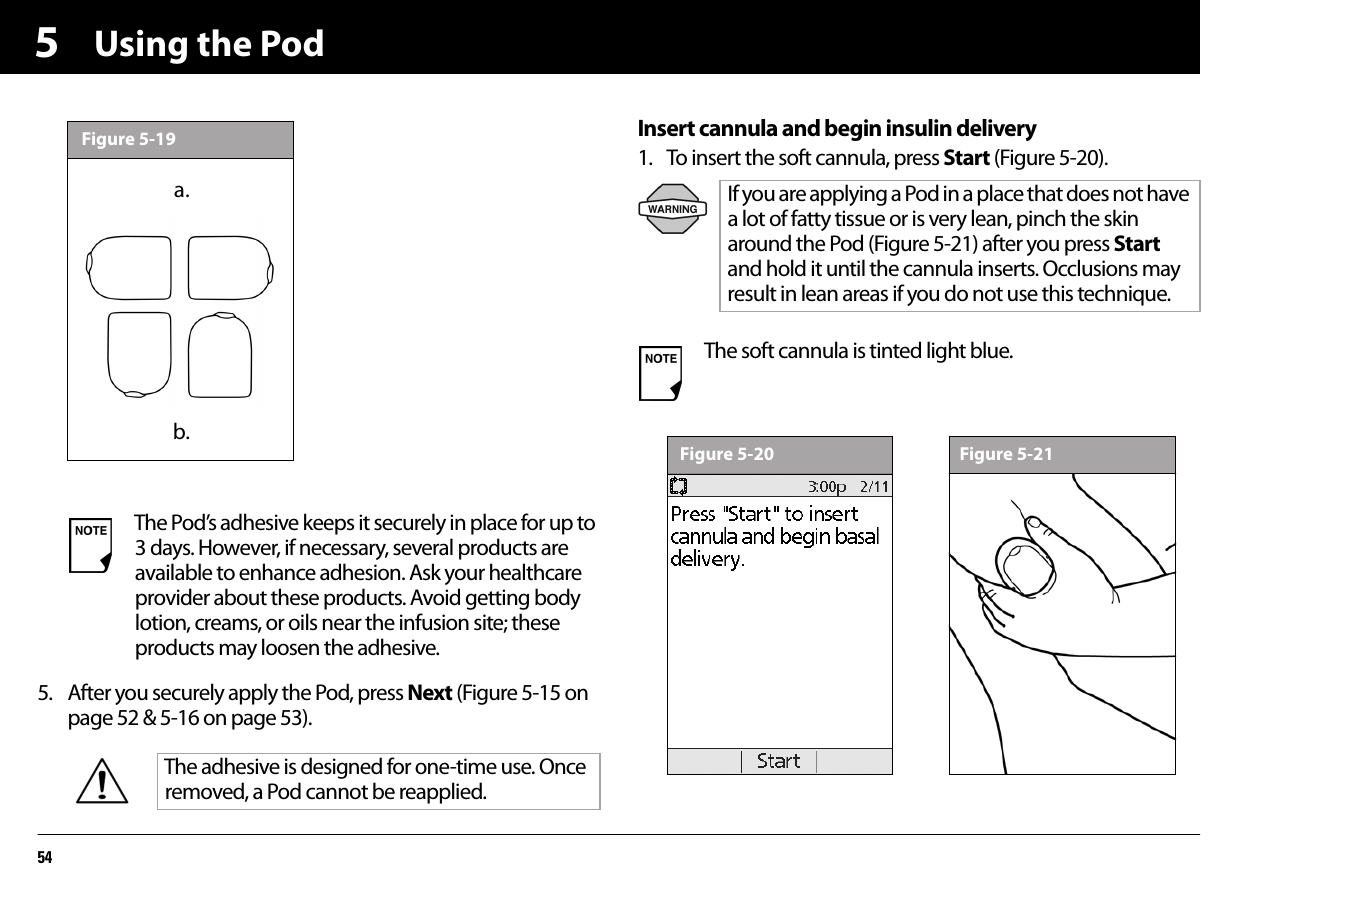 Using the Pod5455. After you securely apply the Pod, press Next (Figure 5-15 on page 52 &amp; 5-16 on page 53). Insert cannula and begin insulin delivery1. To insert the soft cannula, press Start (Figure 5-20).The Pod’s adhesive keeps it securely in place for up to 3 days. However, if necessary, several products are available to enhance adhesion. Ask your healthcare provider about these products. Avoid getting body lotion, creams, or oils near the infusion site; these products may loosen the adhesive.The adhesive is designed for one-time use. Once removed, a Pod cannot be reapplied.Figure 5-13a.b.Figure 5-19If you are applying a Pod in a place that does not have a lot of fatty tissue or is very lean, pinch the skin around the Pod (Figure 5-21) after you press Start and hold it until the cannula inserts. Occlusions may result in lean areas if you do not use this technique.The soft cannula is tinted light blue.Figure 5-20 Figure 5-21